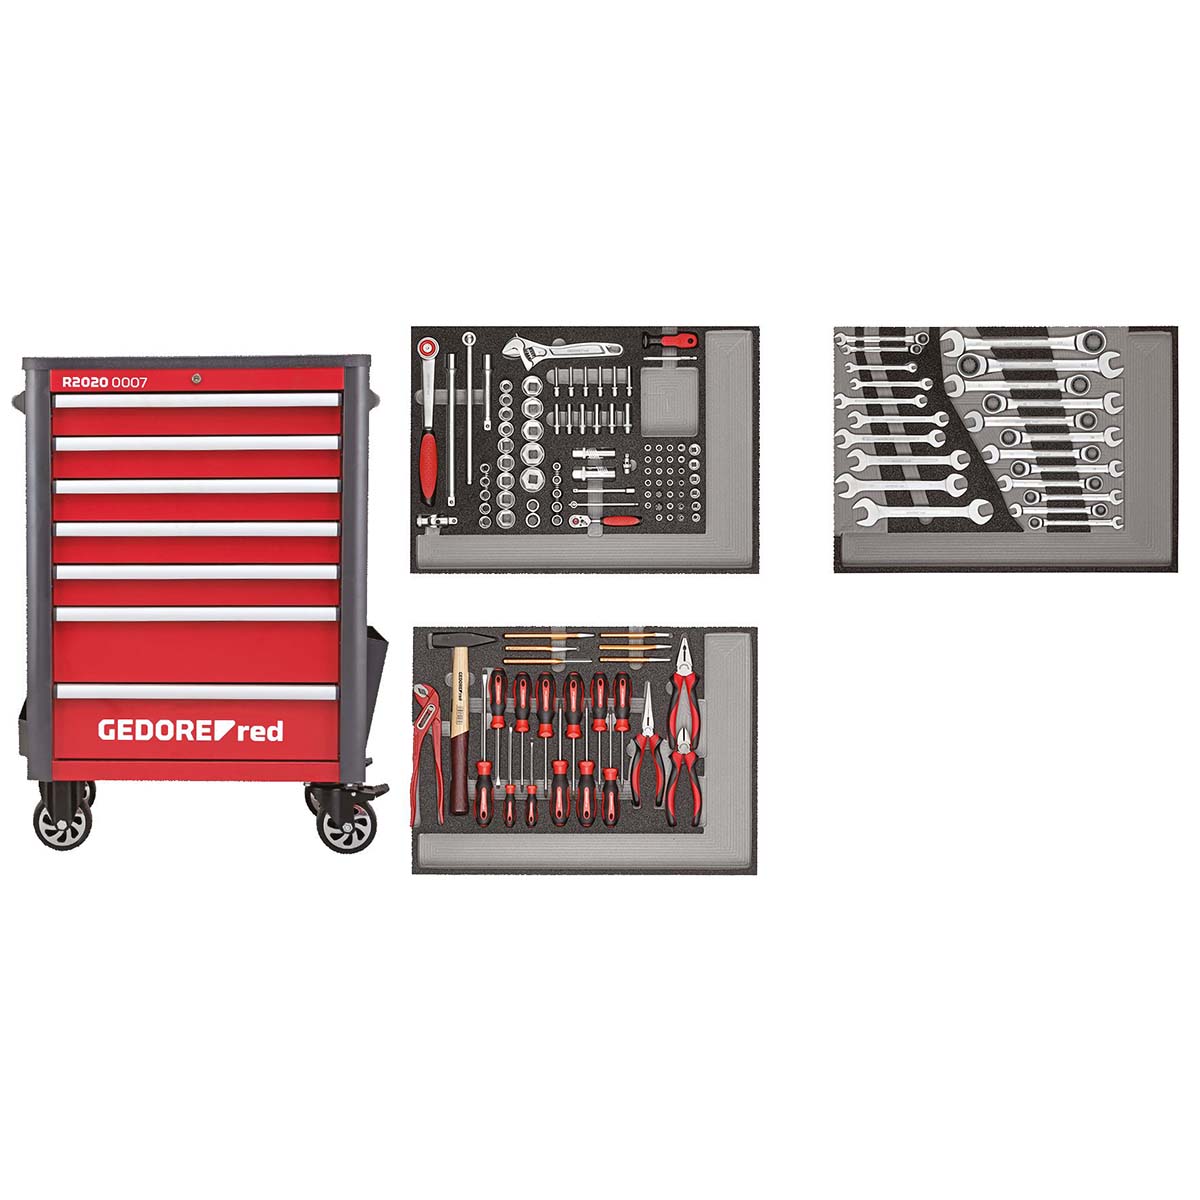 GEDORE red R22071004 - WINGMAN workshop trolley with assortment of 129 tools (3301694)